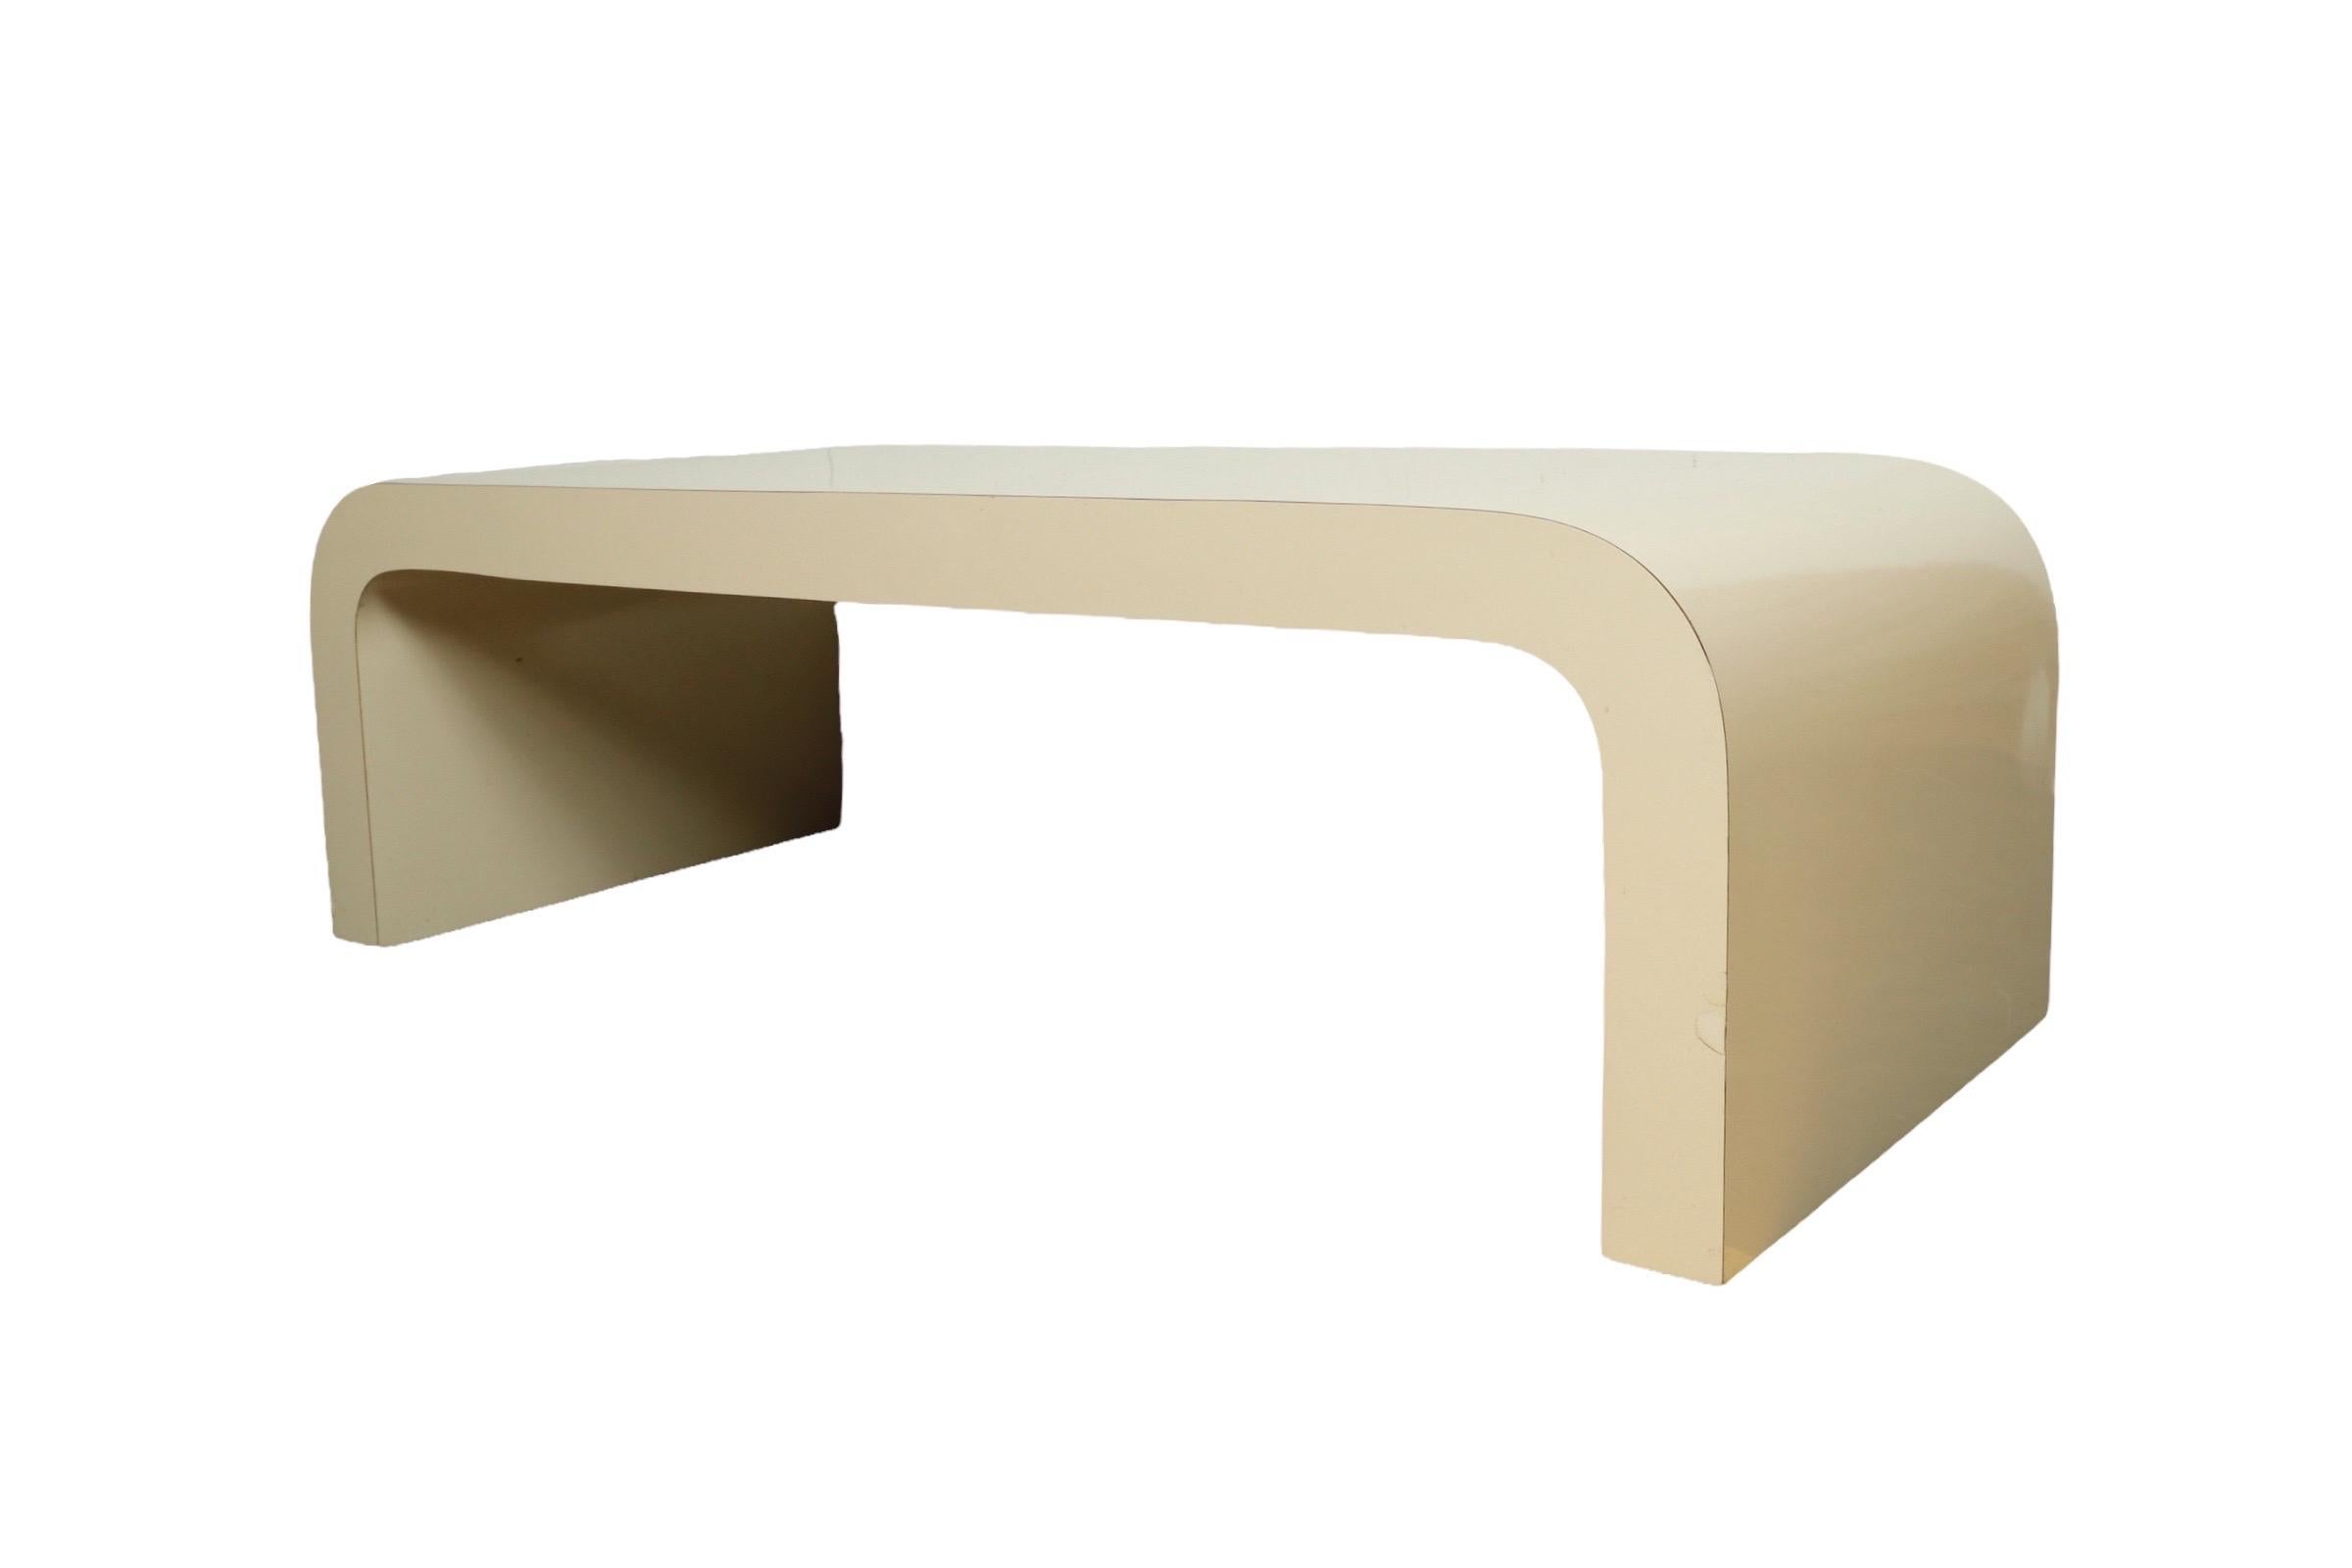 Parsons style waterfall coffee table or bench in off white laminate over wood.

USA, circa 1970.

Dimensions: 52.5” L x 22” D x 16.5” H.